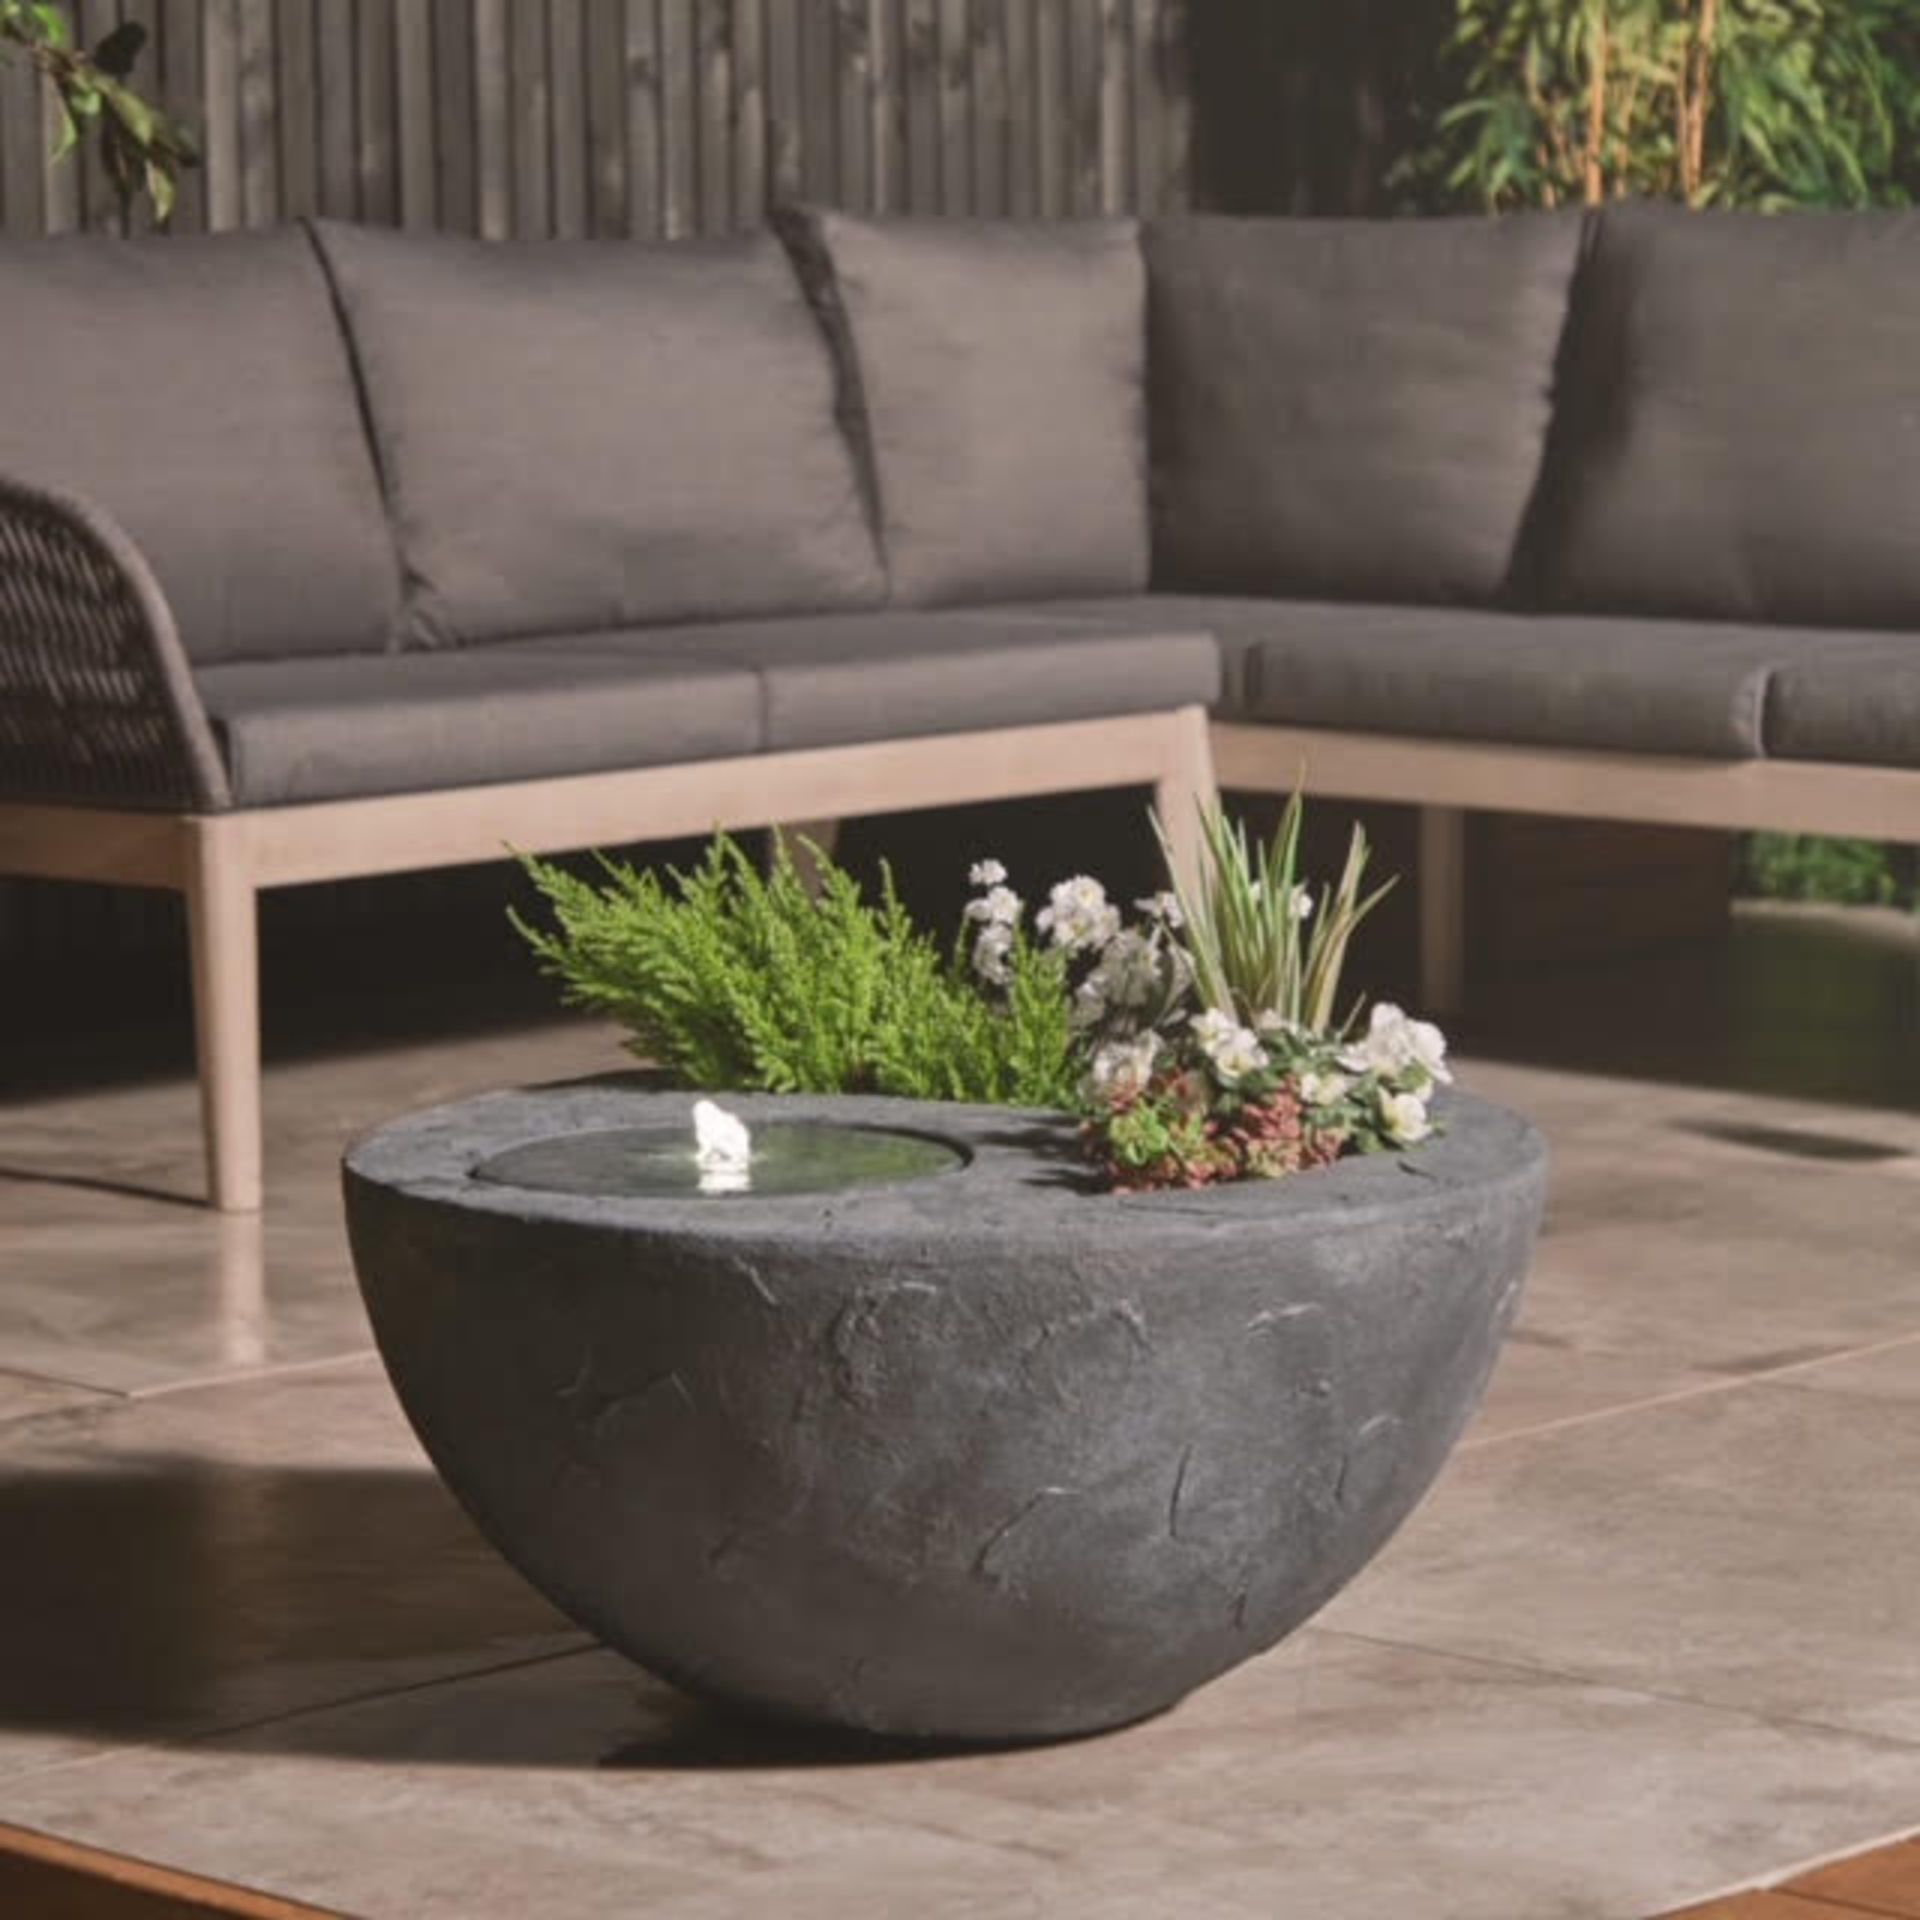 Trade Lot 5 x New & Boxed Dual Water Feature and Planter. RRP £299.99 (REF726) - Garden Bowl - Image 3 of 8